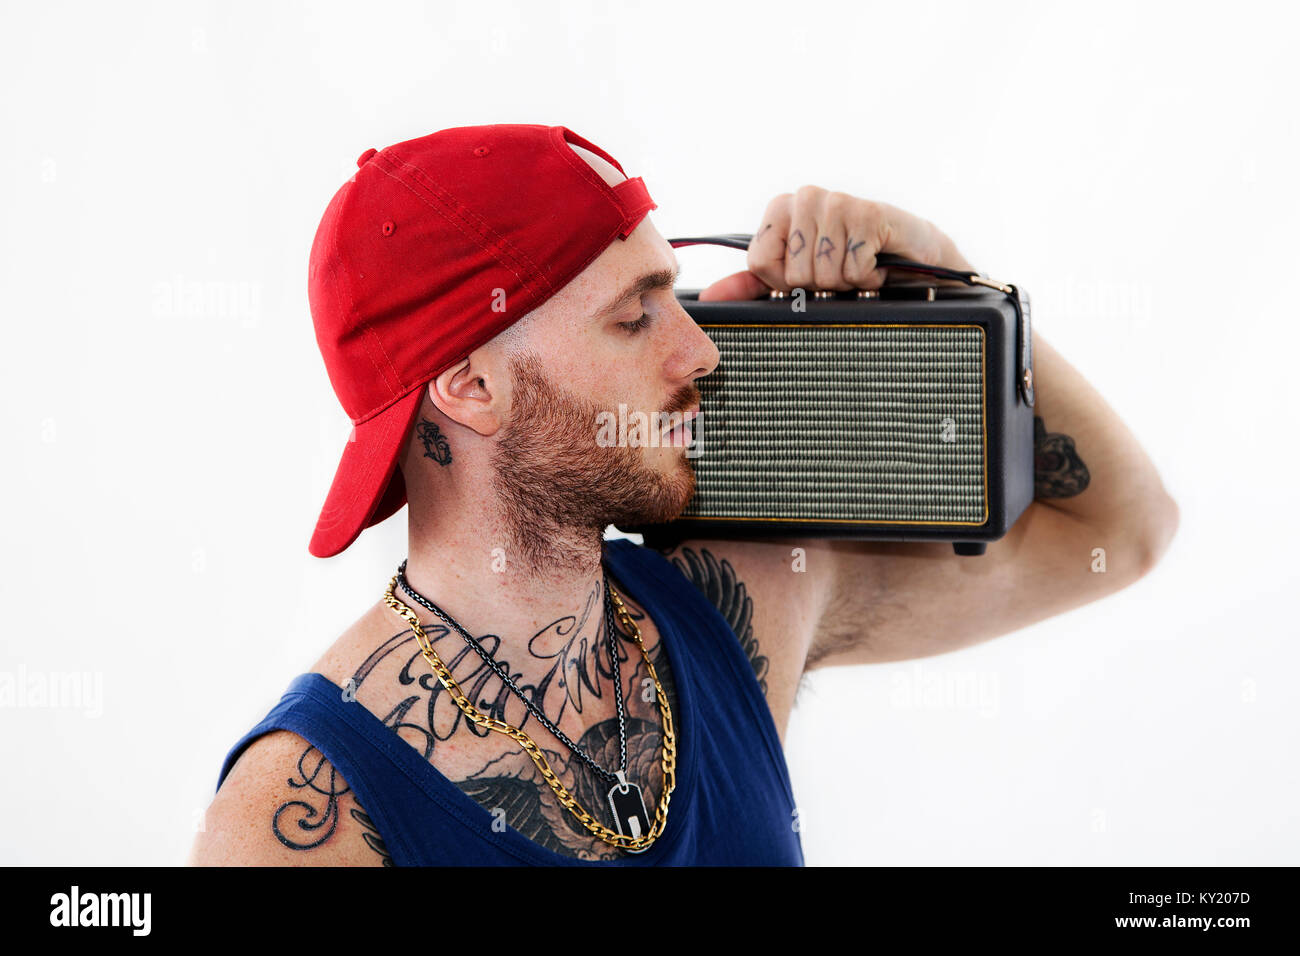 standing tattooed rap singer posing in studio with an amplified radio on a white background Stock Photo